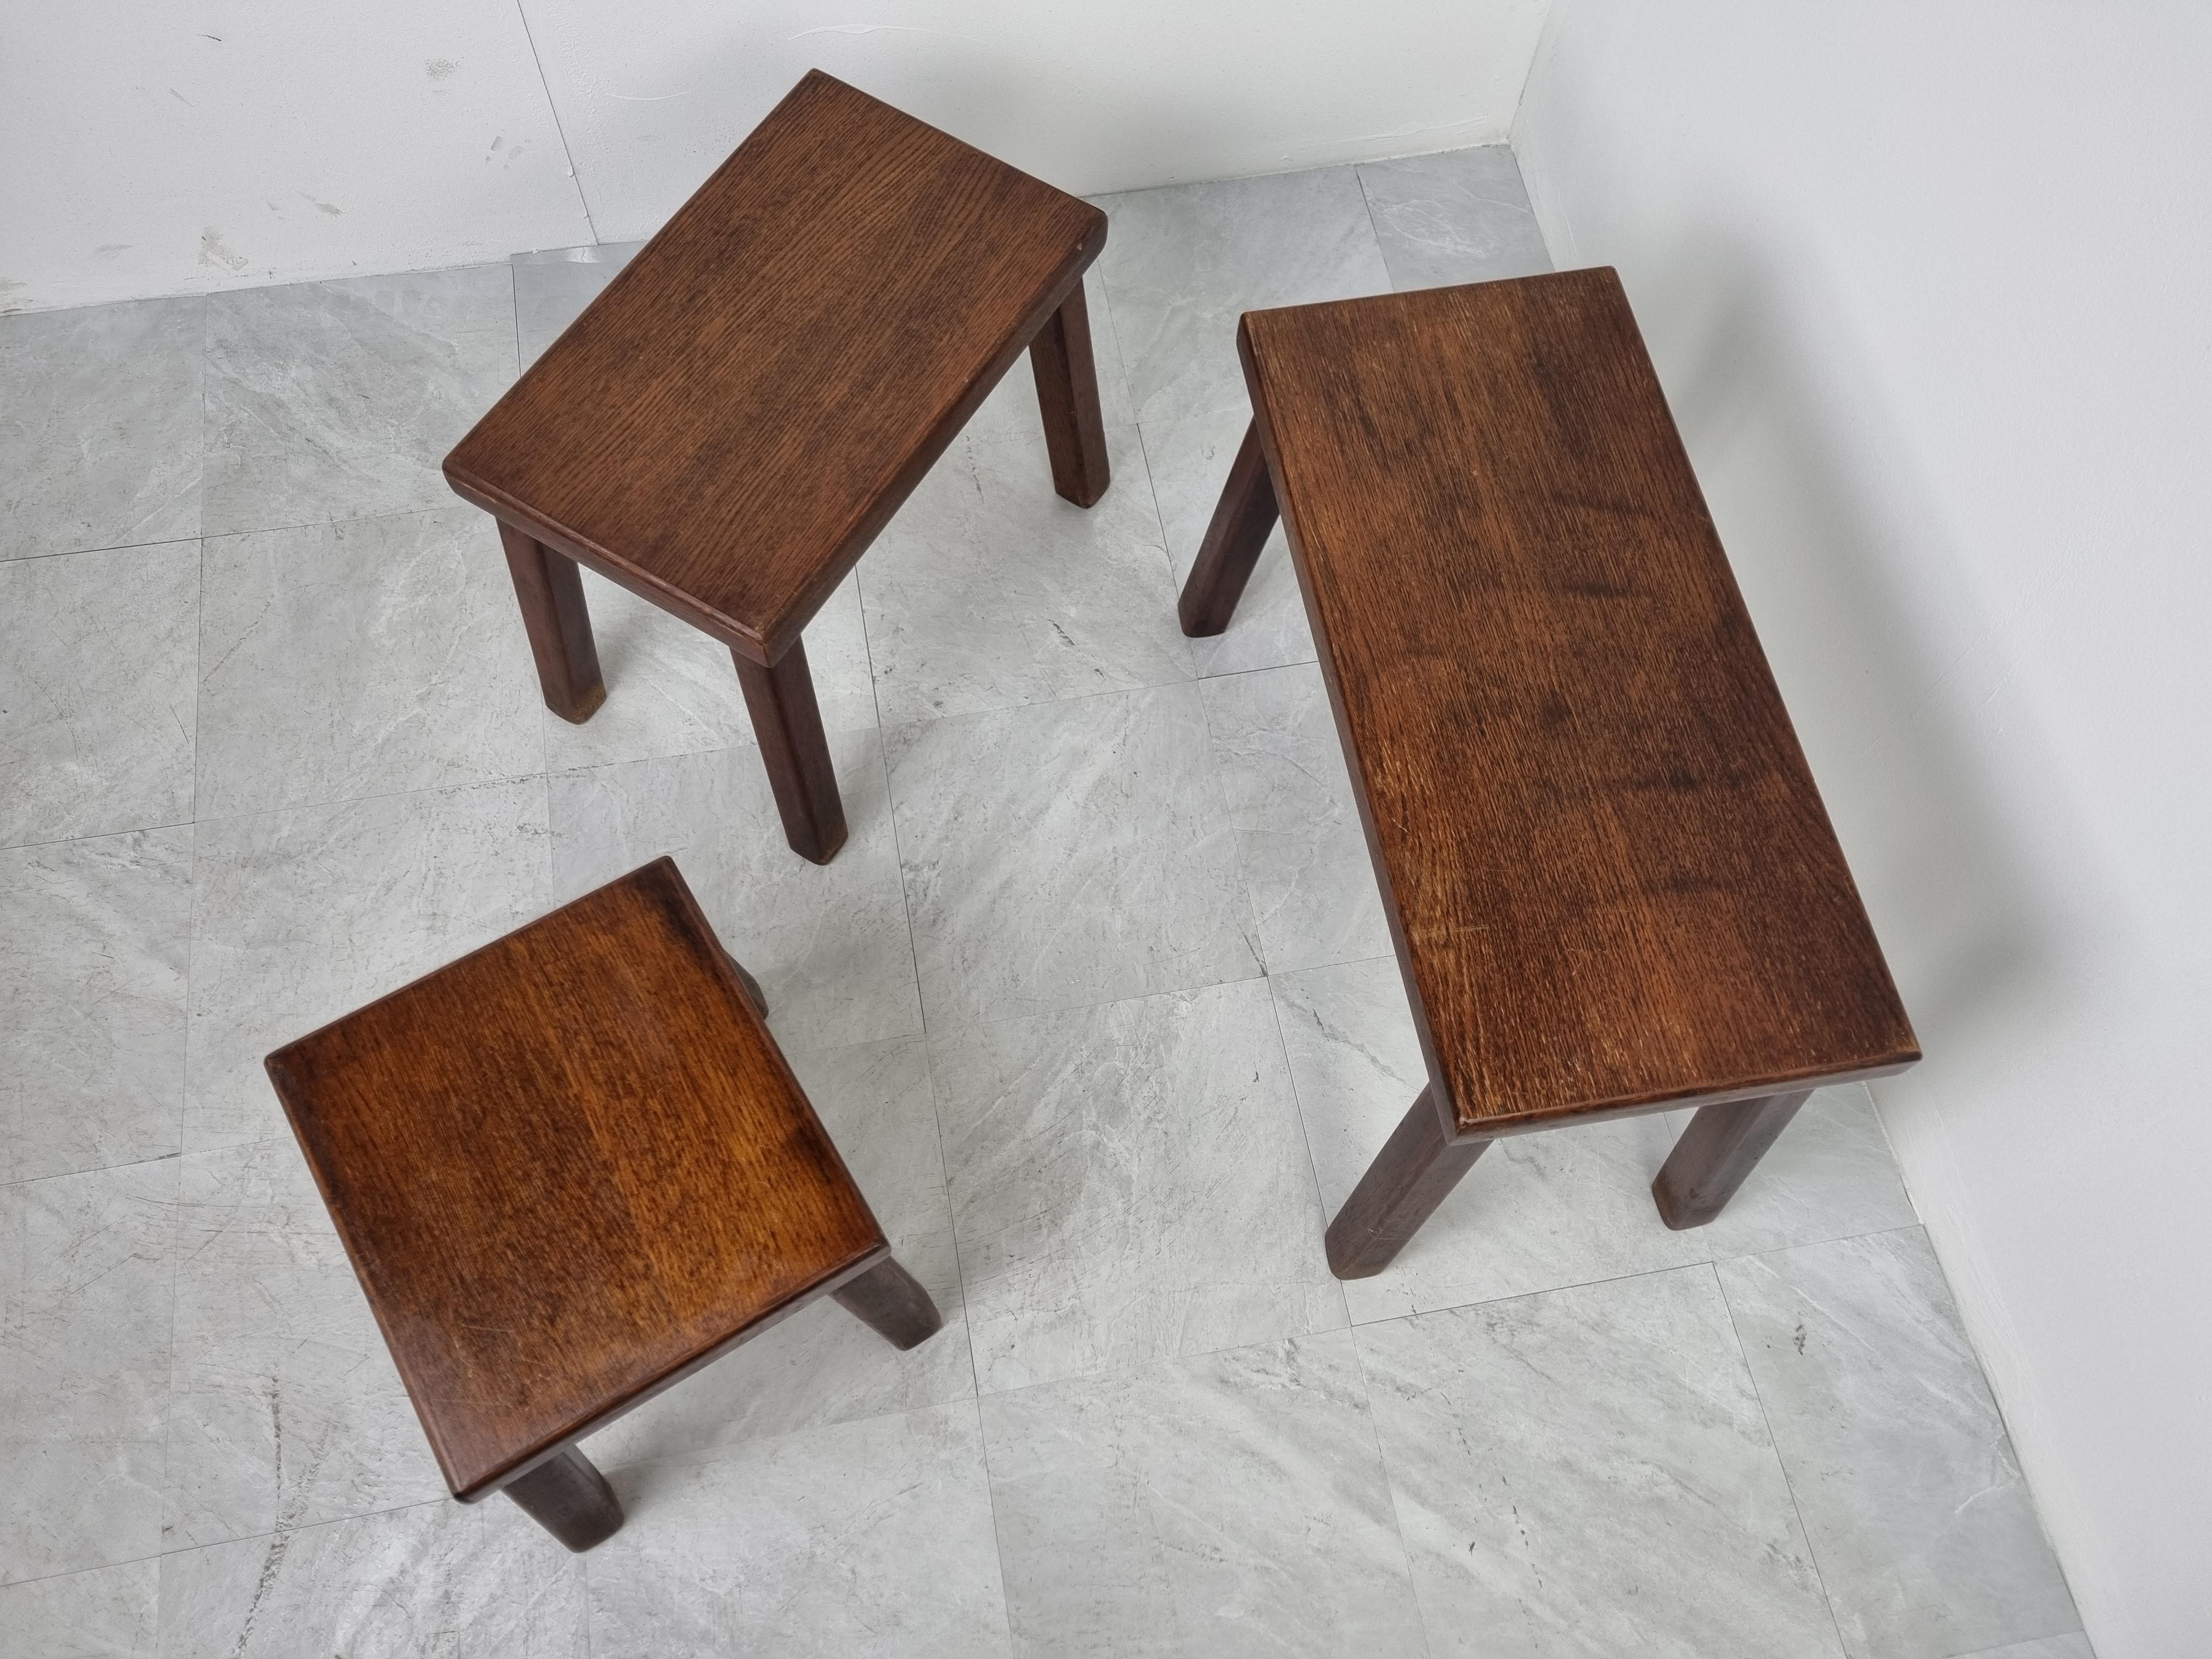 Lovely set of brutalist oak nesting tables.

Primitive and robuste design.

1960s - Belgium

Good condition

Dimensions of the largest table:

Height: 43 cm / 17.32